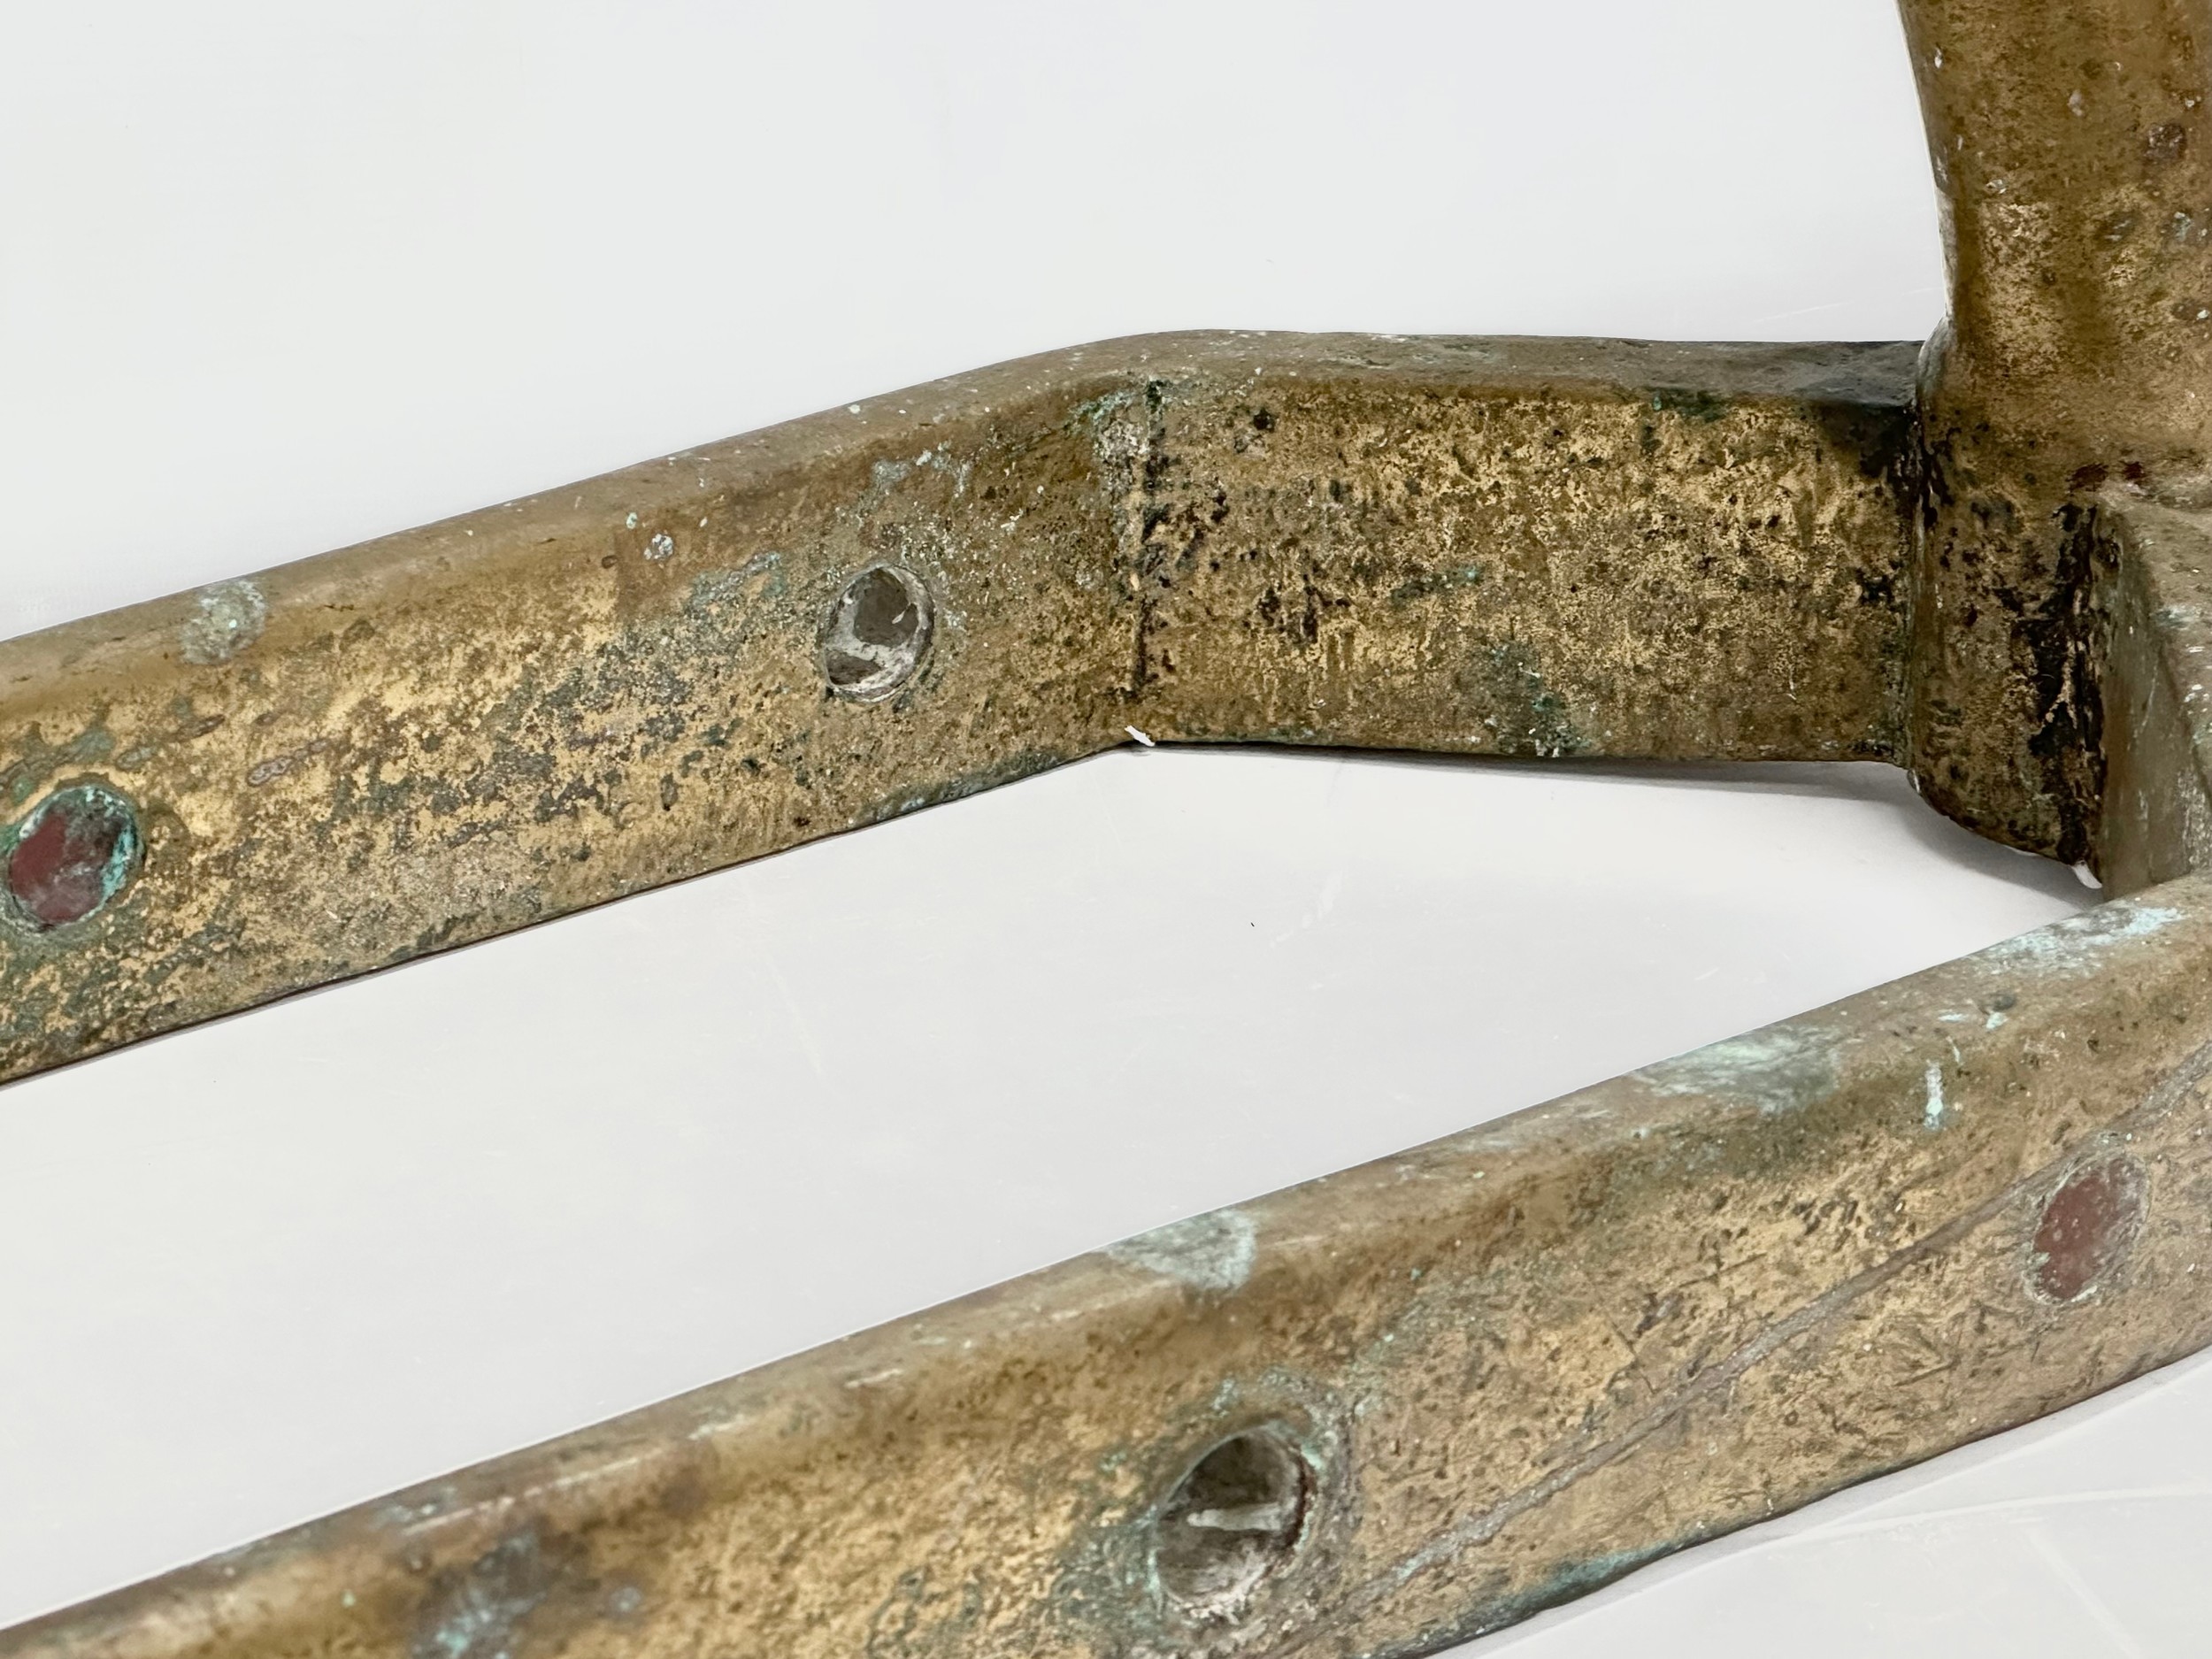 Two 16th Century bronze Gudgeons reportedly from a Spanish Galleon, 71x33x27cm - Image 5 of 7